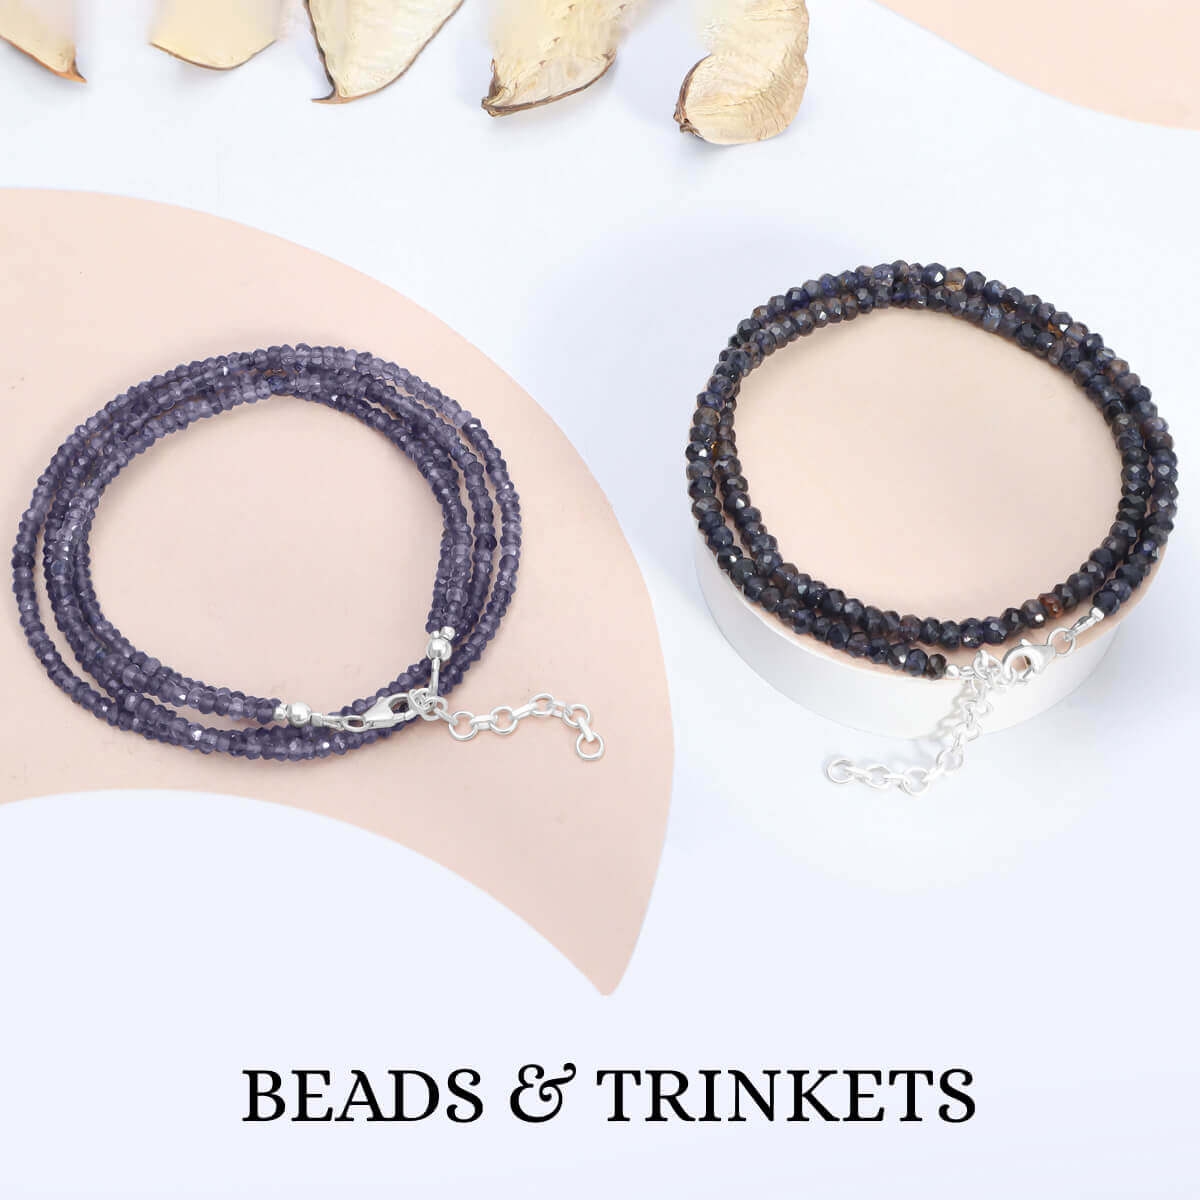 Significance of Gemstone Beads Trinkets